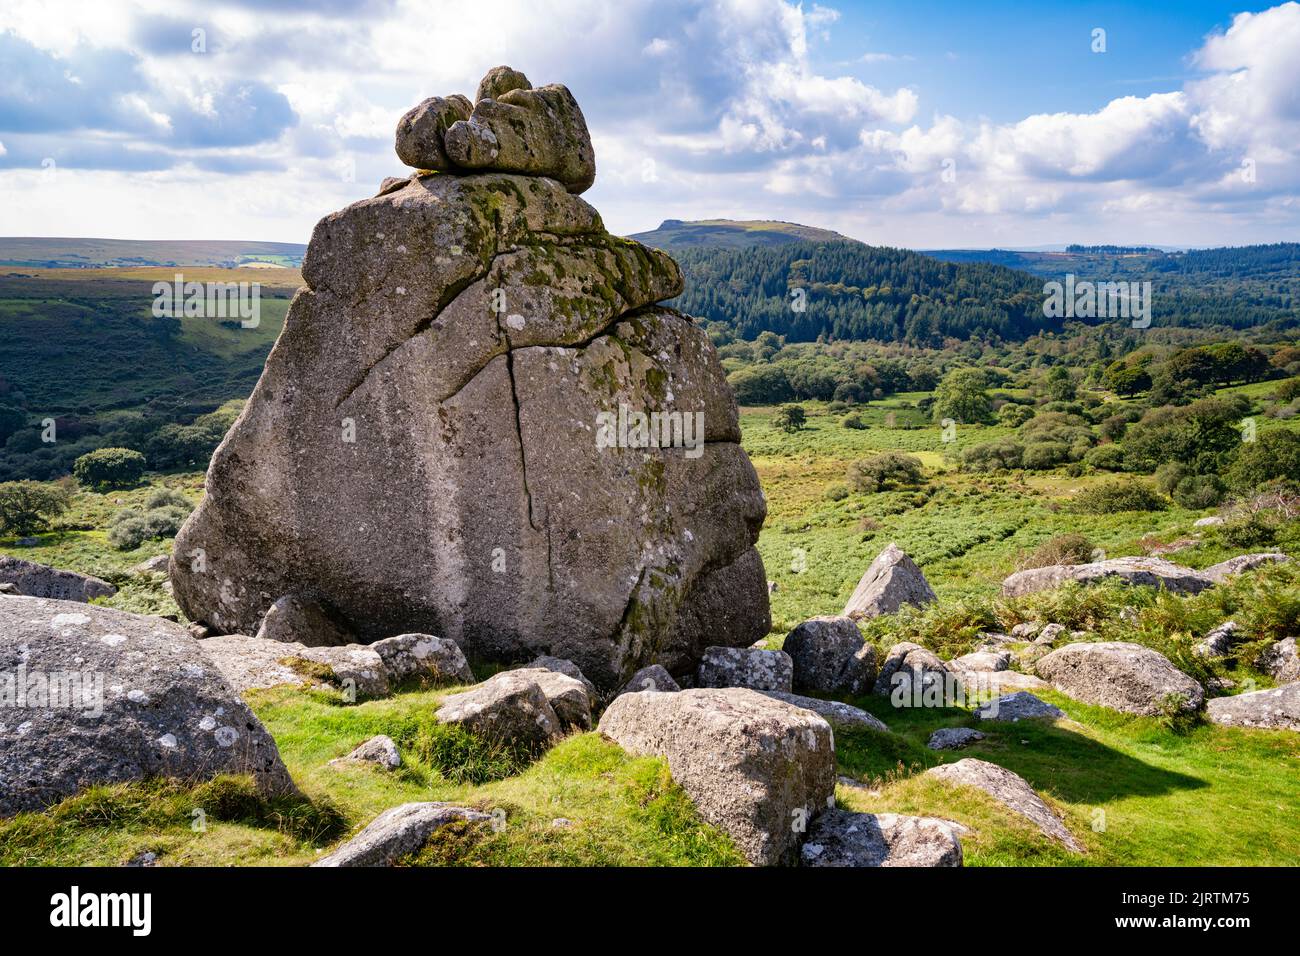 Cuckoo Rock is a granite outcrop on the slope of Combshead Tor in Dartmoor National Park, Devon, UK Stock Photo